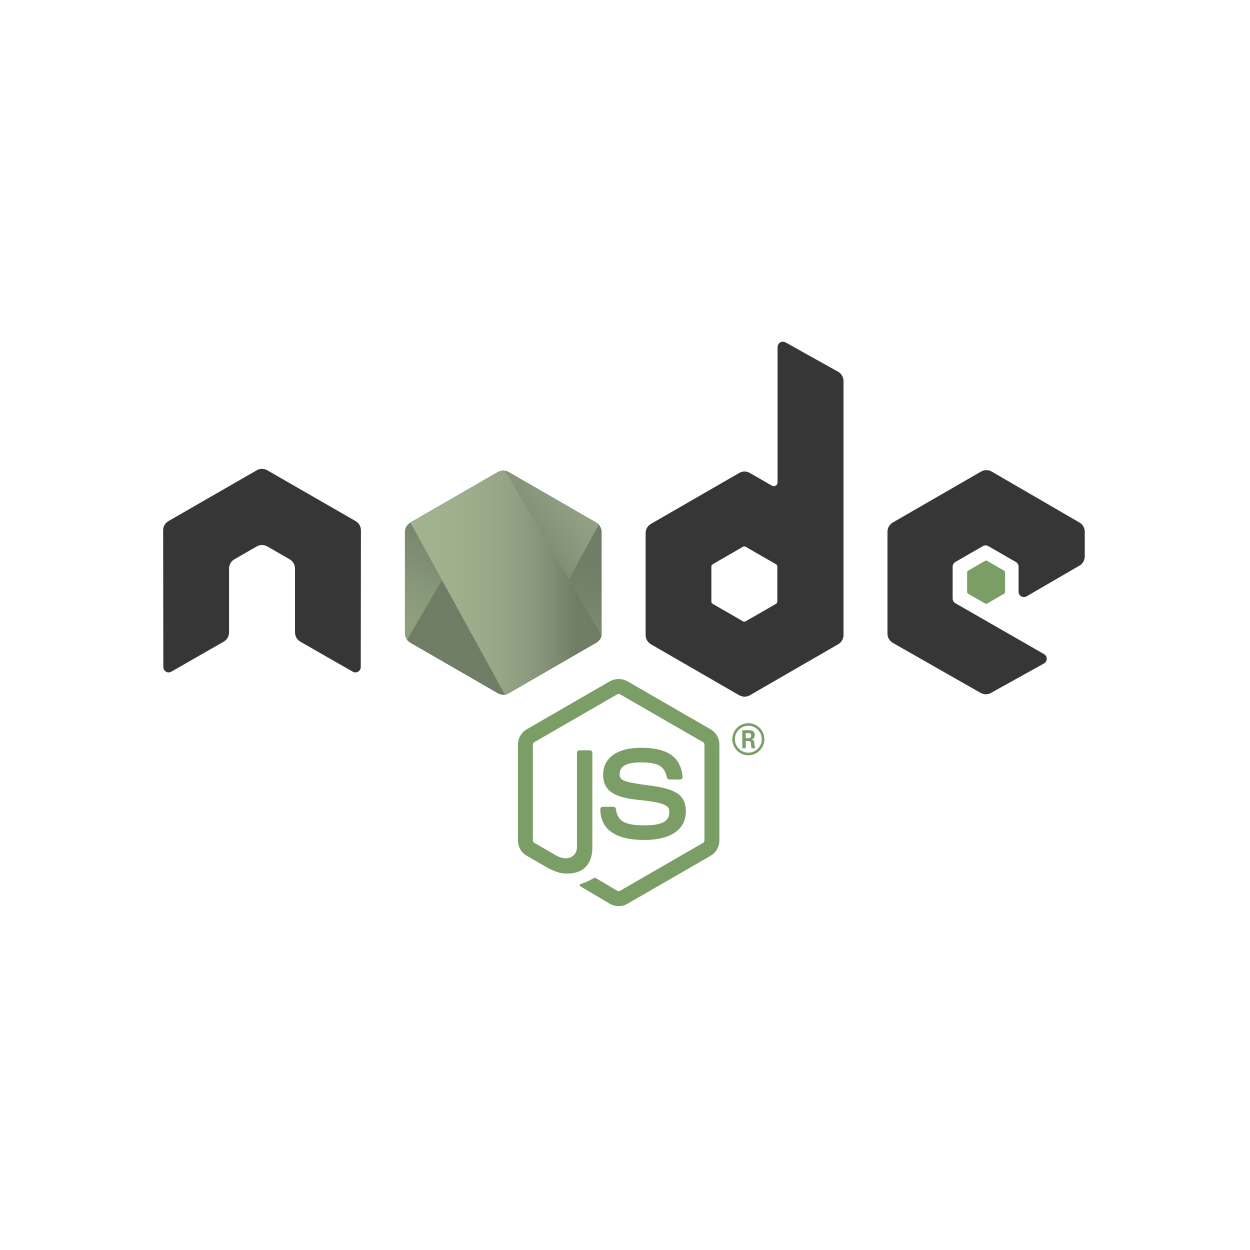 Using Node.js? The OpenJS Foundation would like to hear your feedback